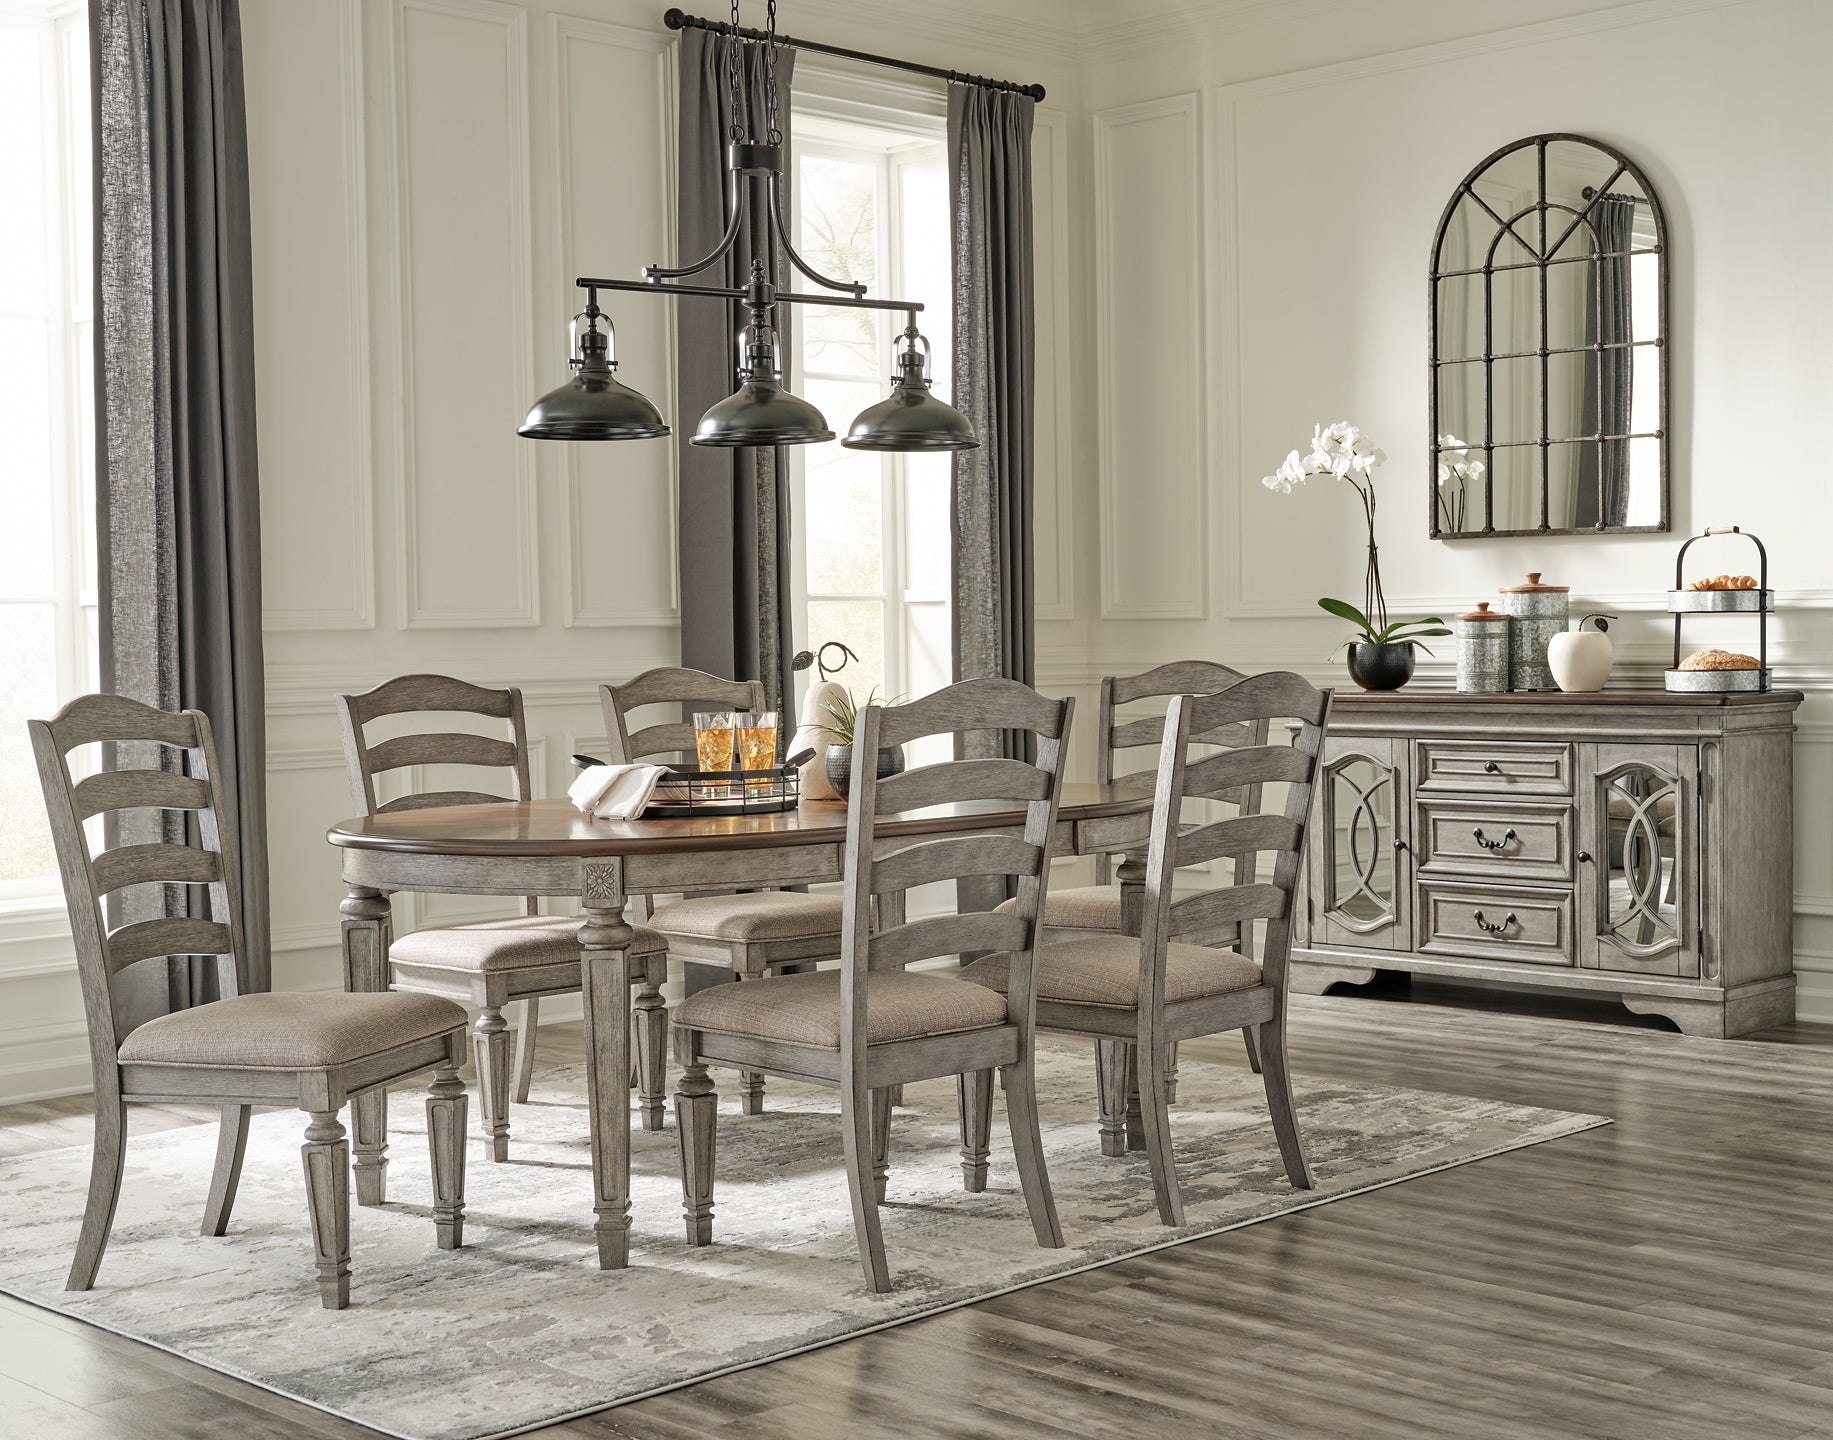 Lodenbay Dining Table and 6 Chairs with Storage at Cloud 9 Mattress & Furniture furniture, home furnishing, home decor